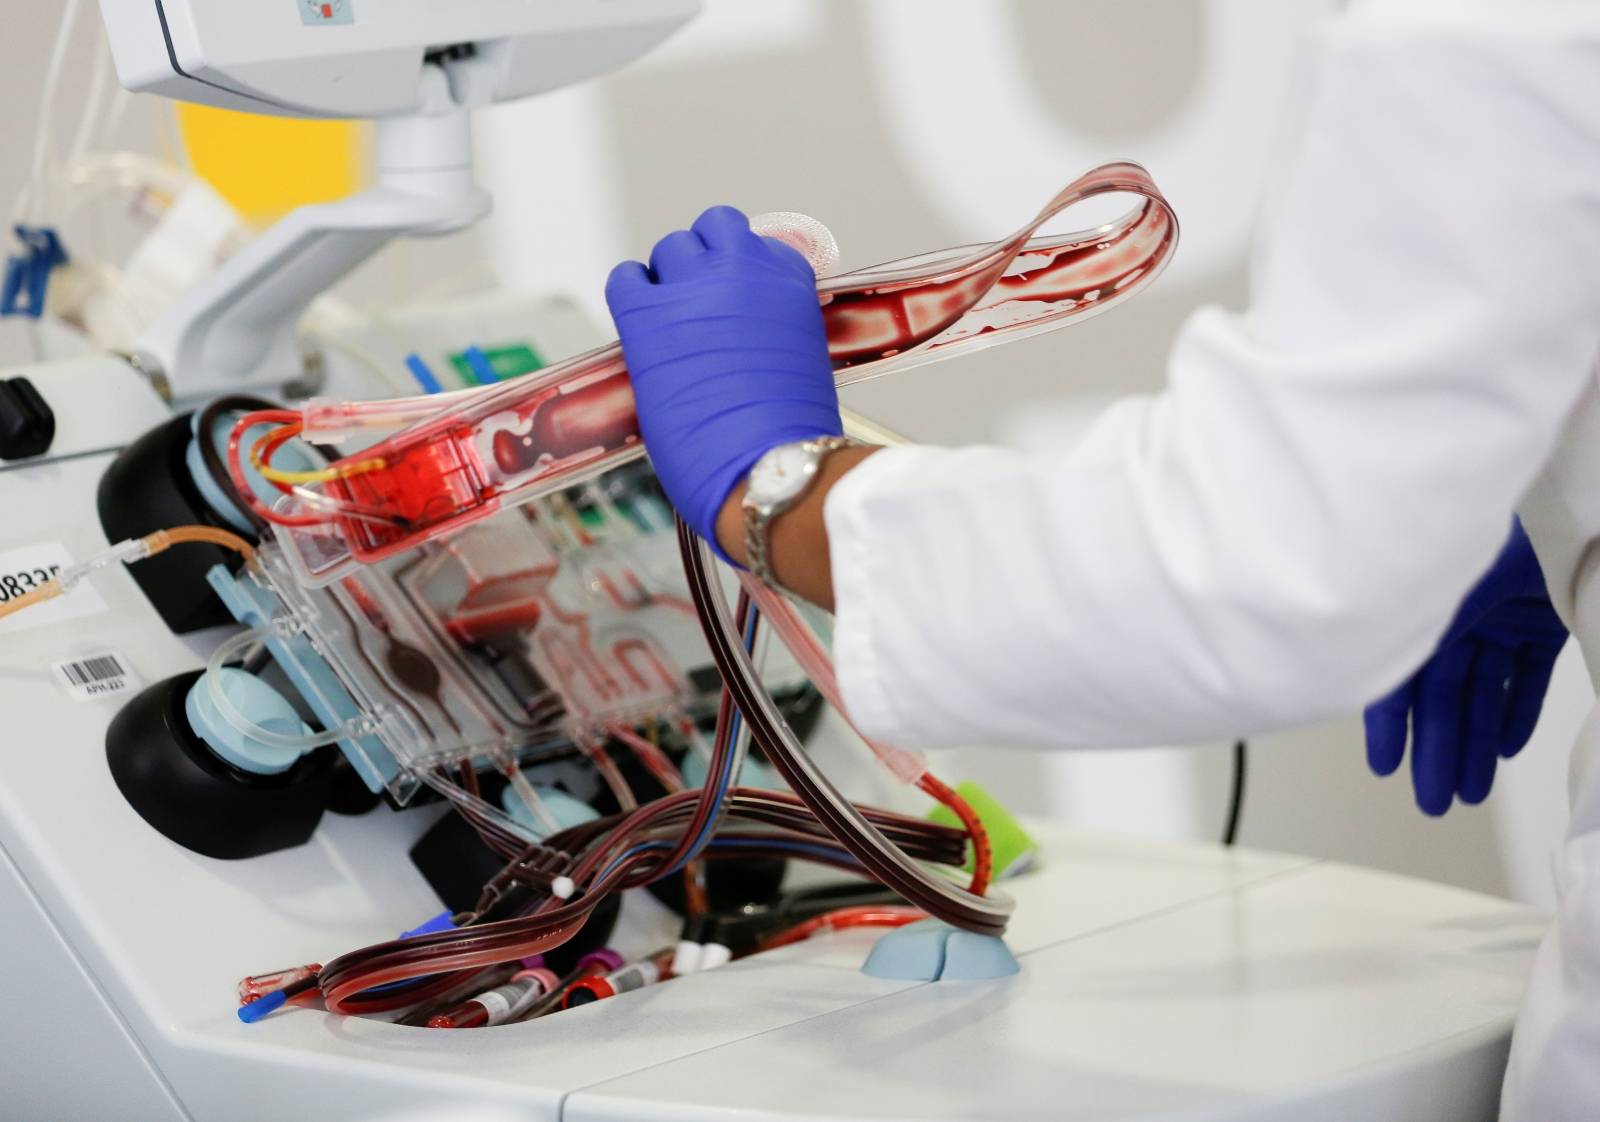 FILE PHOTO: Phlebotomist Wilson takes apart an apheresis kit after processing convalescent plasma for an experimental treatment study during the coronavirus disease (COVID-19) outbreak in Seattle